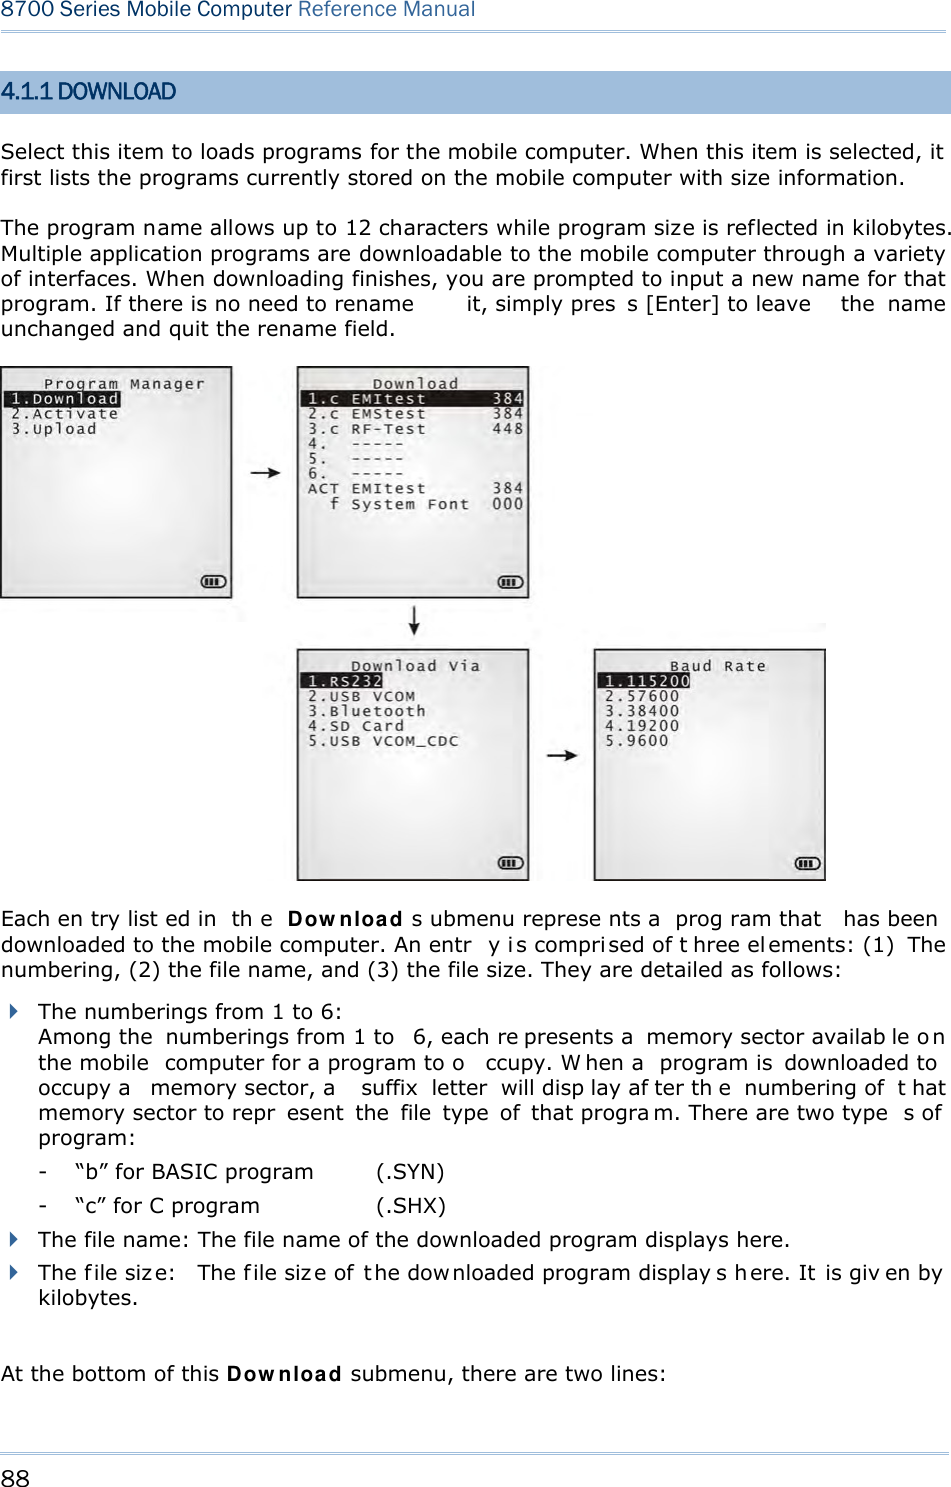 88  8700 Series Mobile Computer Reference Manual  4.1.1 DOWNLOAD Select this item to loads programs for the mobile computer. When this item is selected, it first lists the programs currently stored on the mobile computer with size information. The program name allows up to 12 characters while program size is reflected in kilobytes. Multiple application programs are downloadable to the mobile computer through a variety of interfaces. When downloading finishes, you are prompted to input a new name for that program. If there is no need to rename  it, simply pres s [Enter] to leave  the  name unchanged and quit the rename field.  Each en try list ed in  th e  D ow nload s ubmenu represe nts a  prog ram that  has been  downloaded to the mobile computer. An entr y i s compri sed of t hree el ements: (1)  The numbering, (2) the file name, and (3) the file size. They are detailed as follows:  The numberings from 1 to 6: Among the  numberings from 1 to   6, each re presents a  memory sector availab le o n the mobile  computer for a program to o ccupy. W hen a  program is  downloaded to  occupy a  memory sector, a  suffix  letter  will disp lay af ter th e  numbering of  t hat memory sector to repr esent  the  file  type  of  that progra m. There are two type s of  program: -  “b” for BASIC program  (.SYN) -  “c” for C program    (.SHX)  The file name: The file name of the downloaded program displays here.  The f ile siz e:    The file siz e of  t he dow nloaded program display s h ere. It  is giv en by  kilobytes.  At the bottom of this Dow n load submenu, there are two lines: 